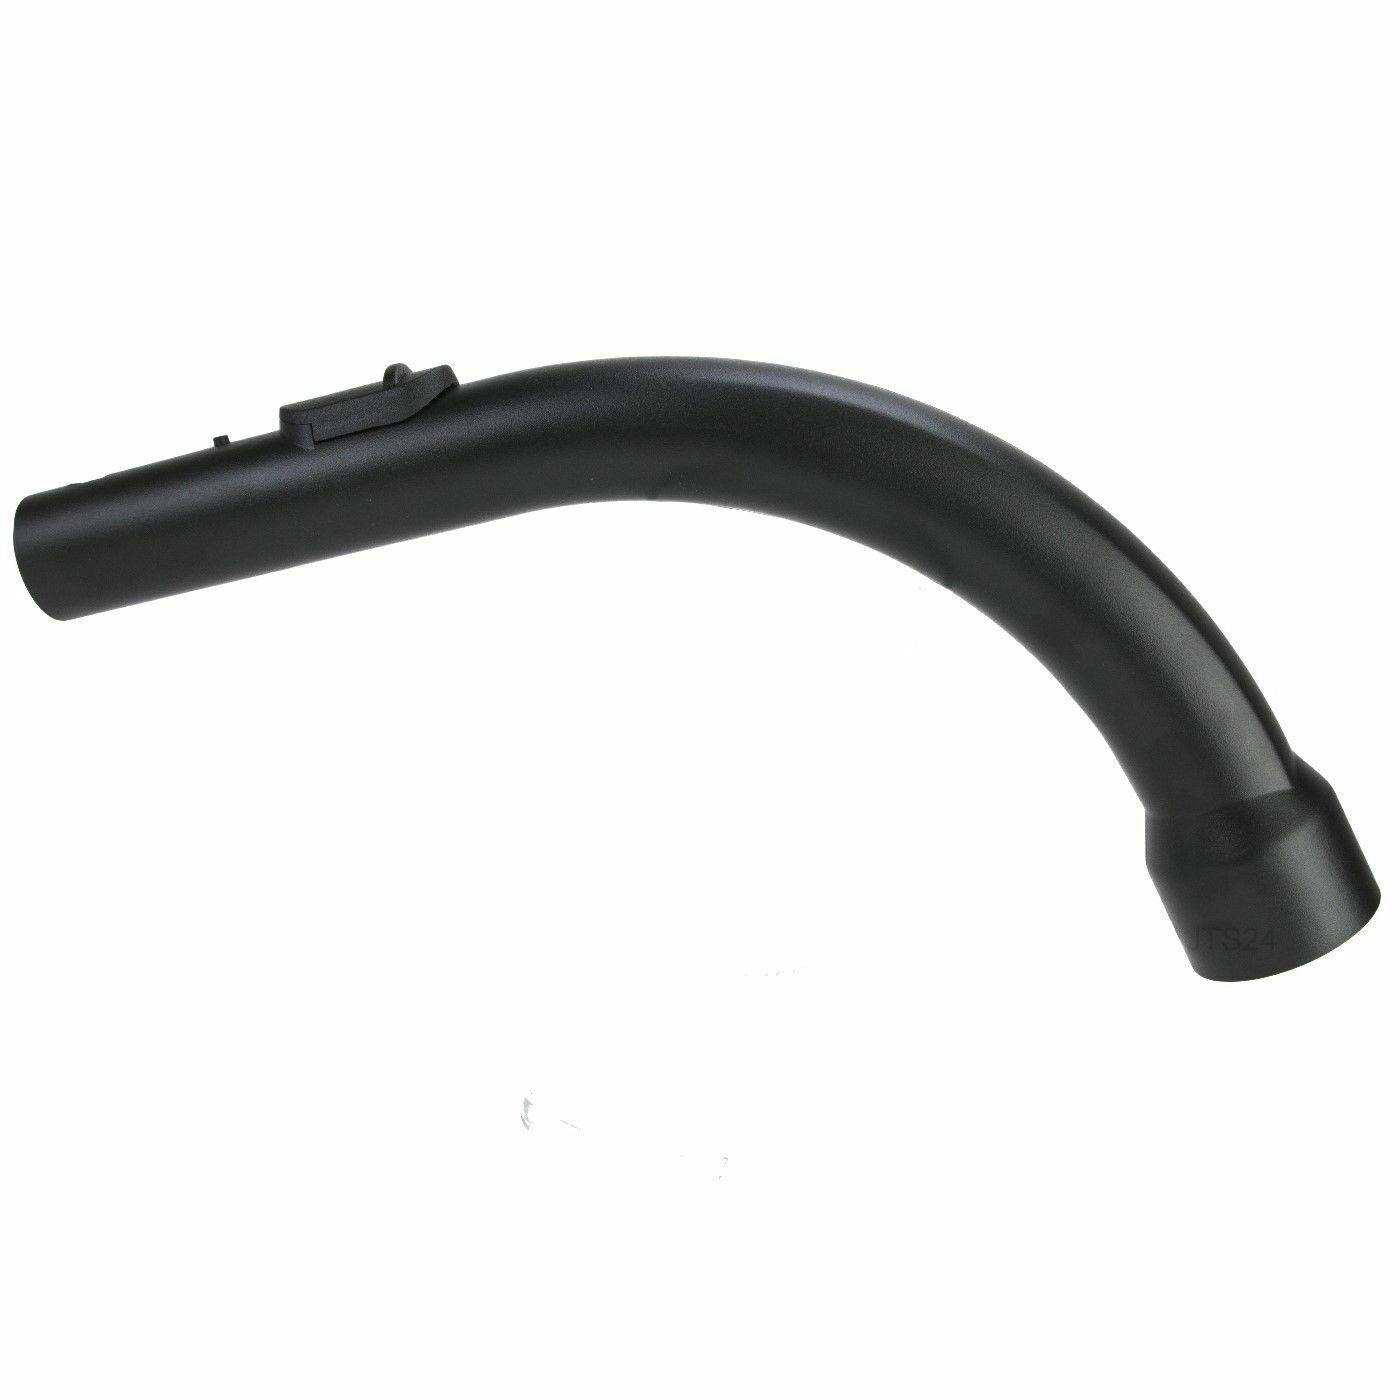 Vacuum Plastic Bent End Hose Curved Handle For Miele S2110 S501 S524 5269091 Sparesbarn